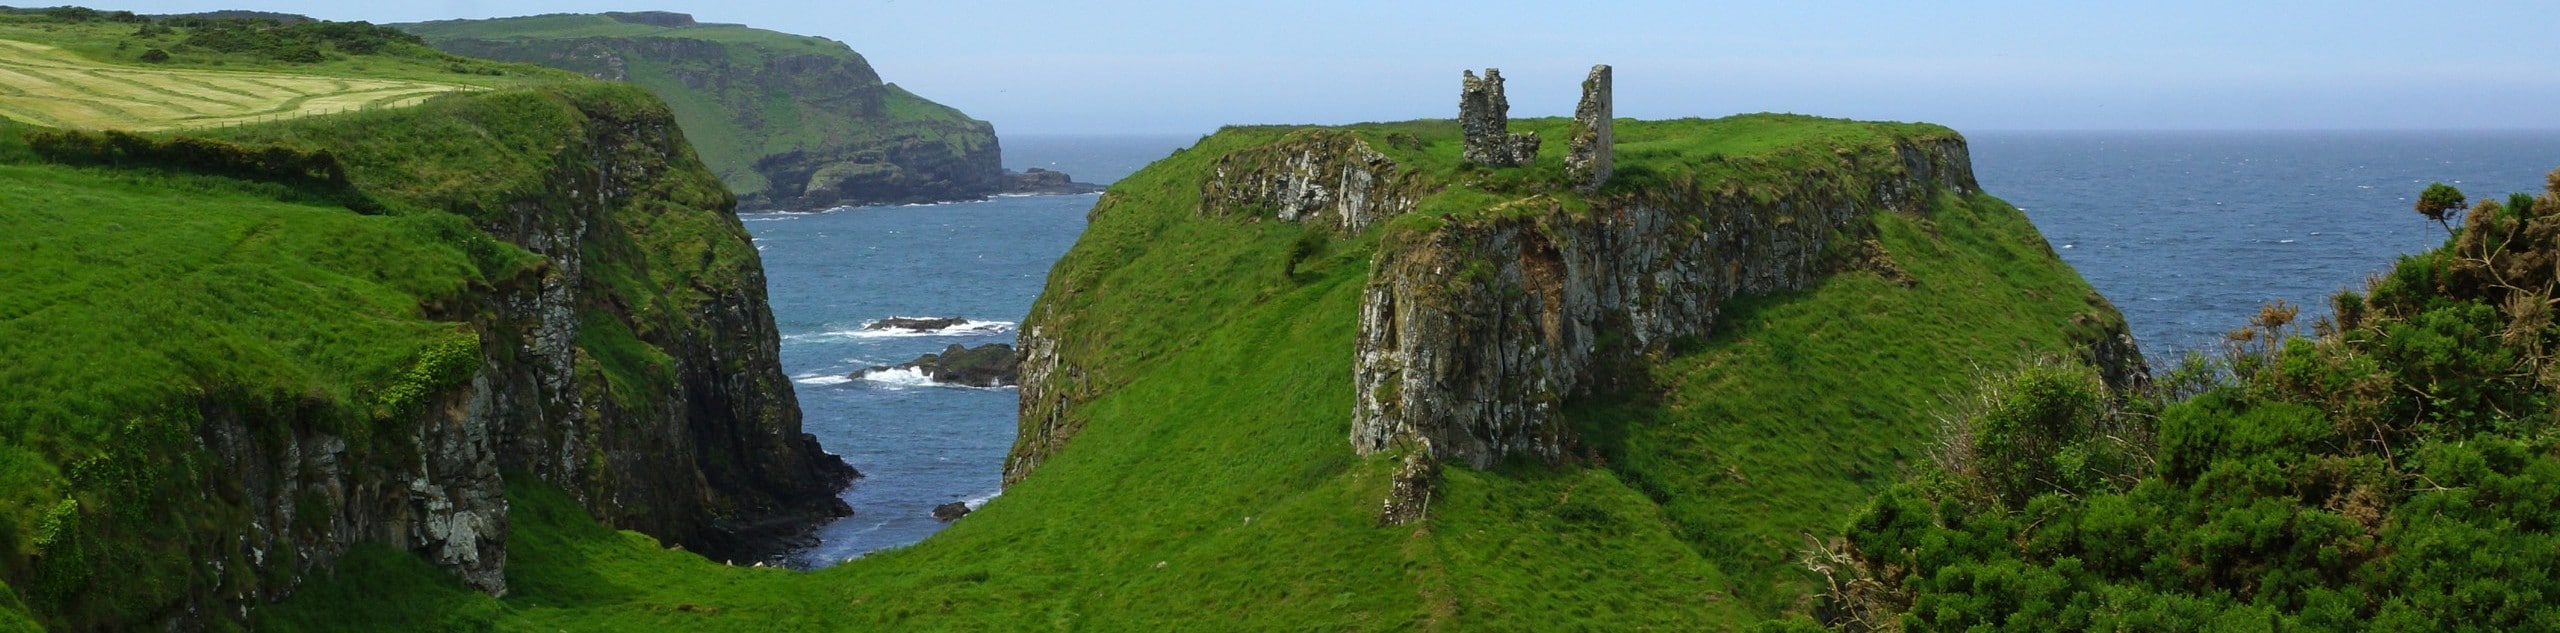 Dunseverick Castle to Giant’s Causeway Walk